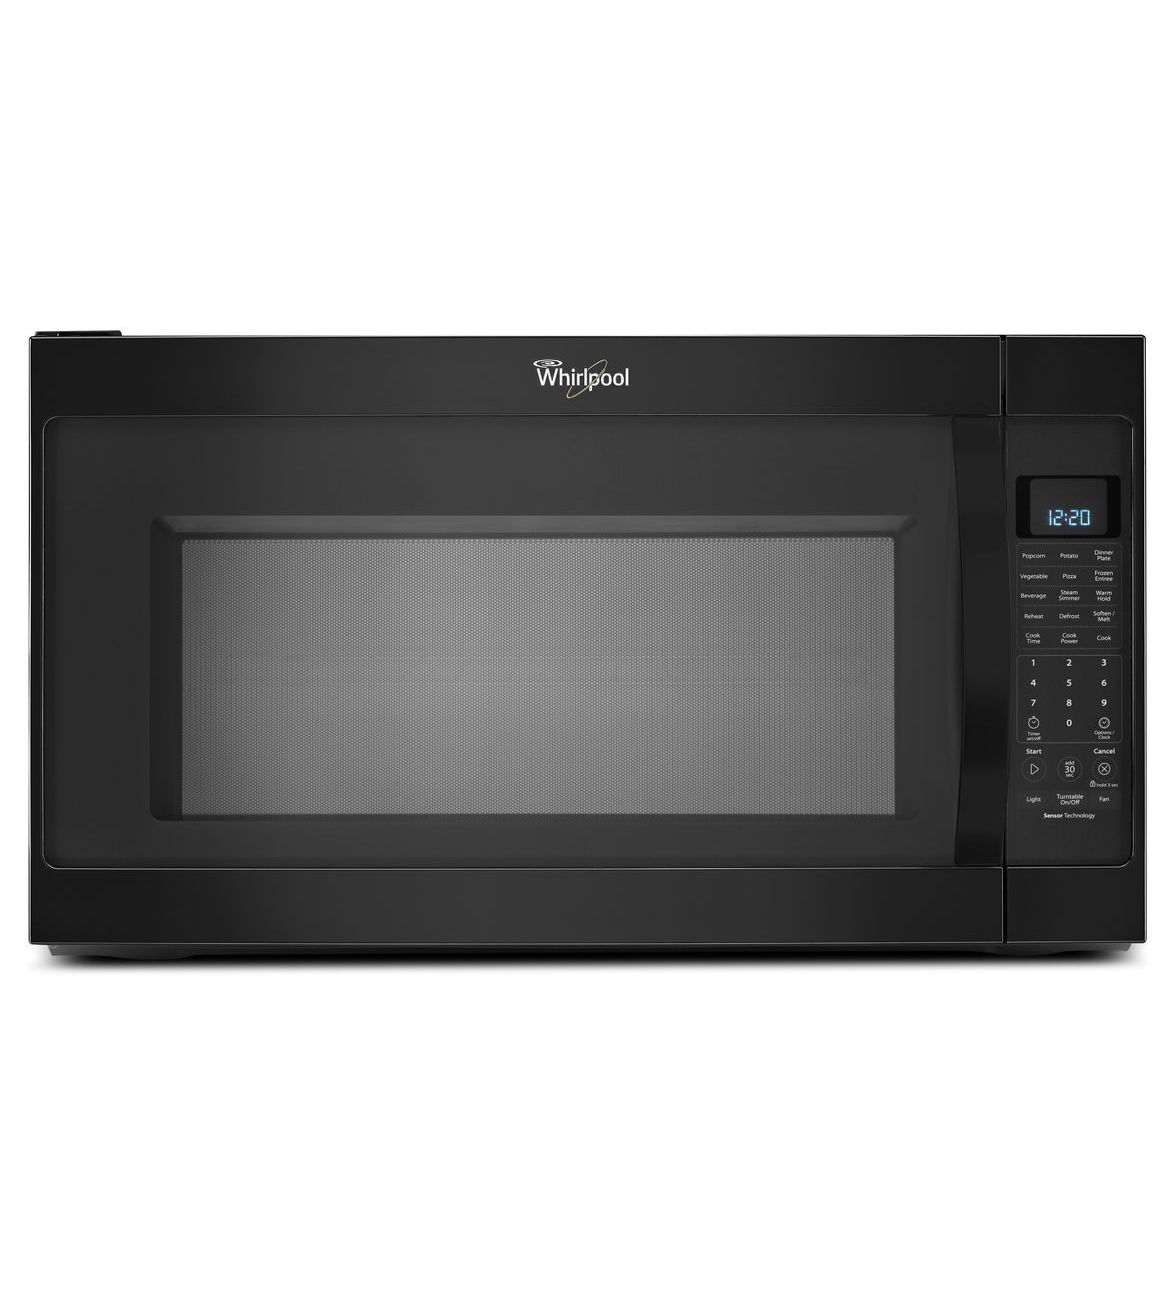 Whirlpool 2 0 Cu Ft Over The Range Microwave With Cleanrelease Non Stick Interior